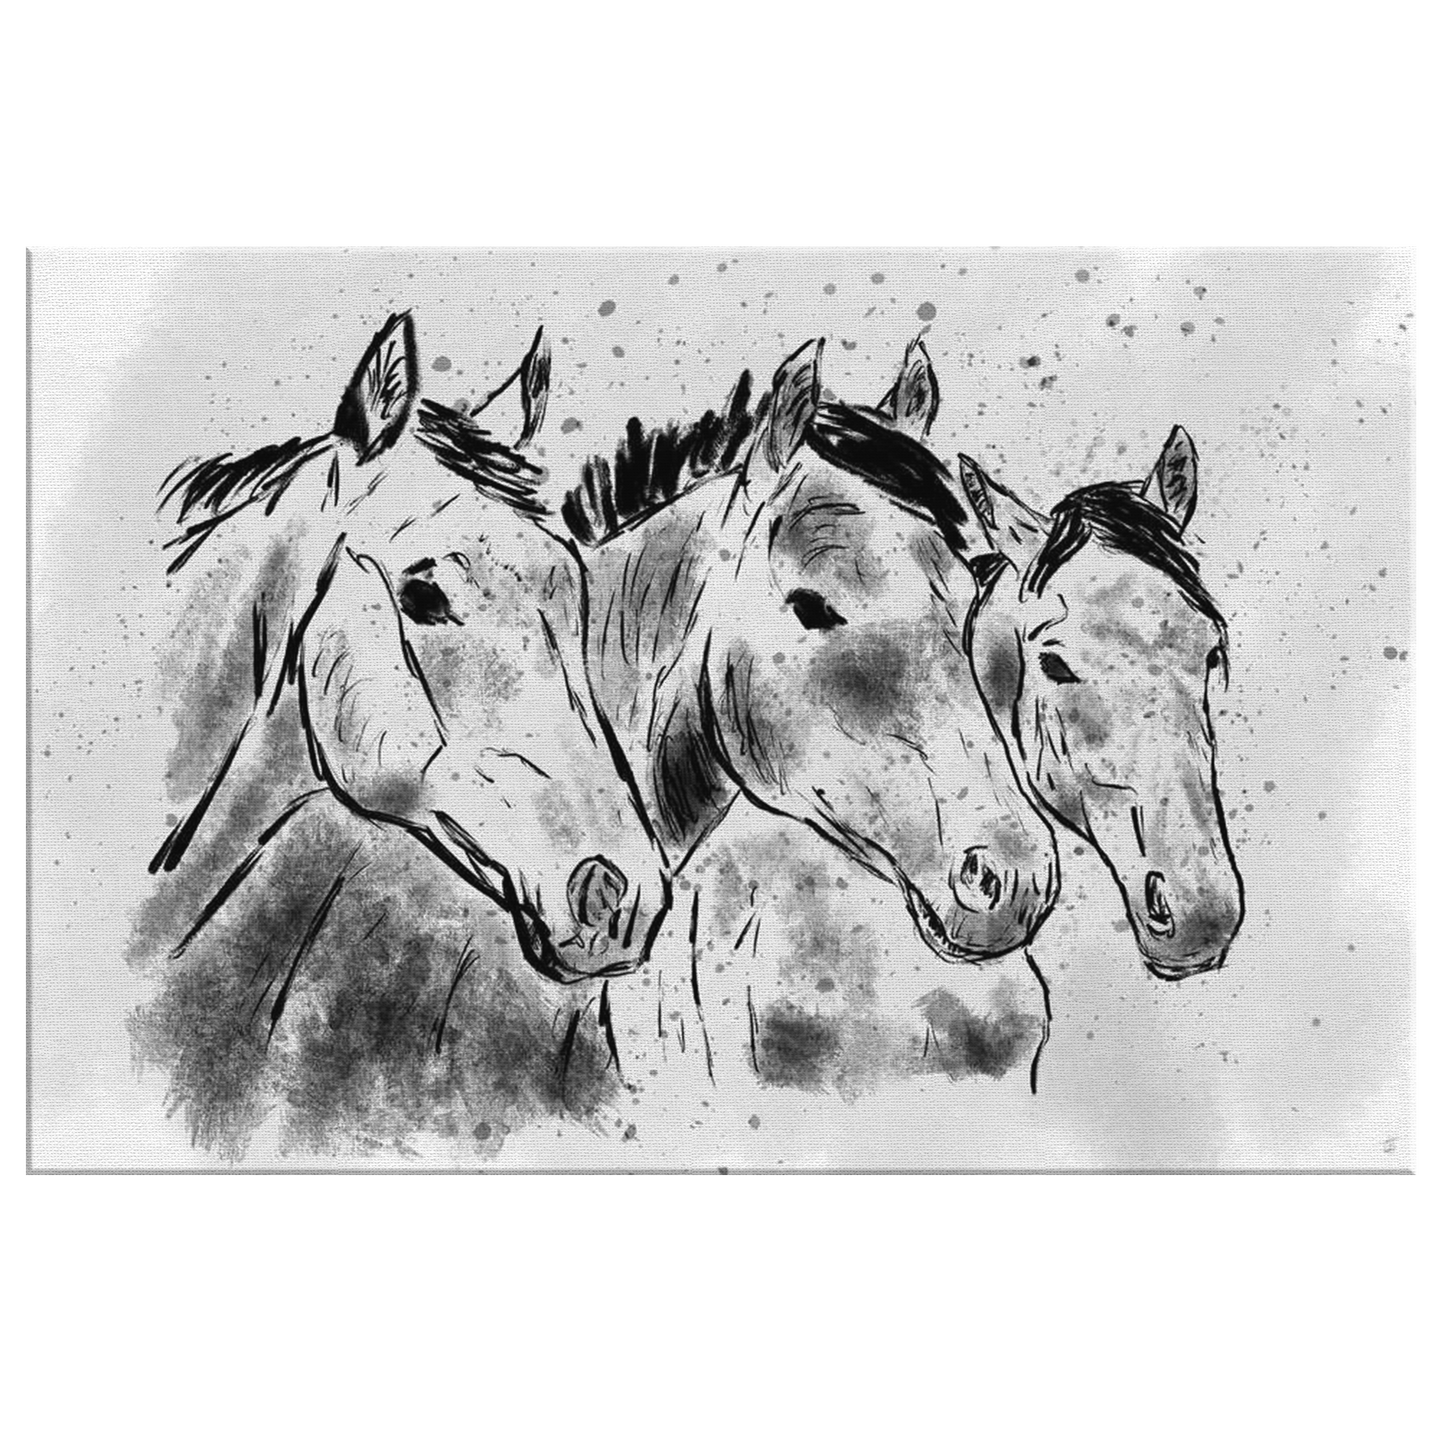 Three Horses and Amigos - The Coffee Catalyst